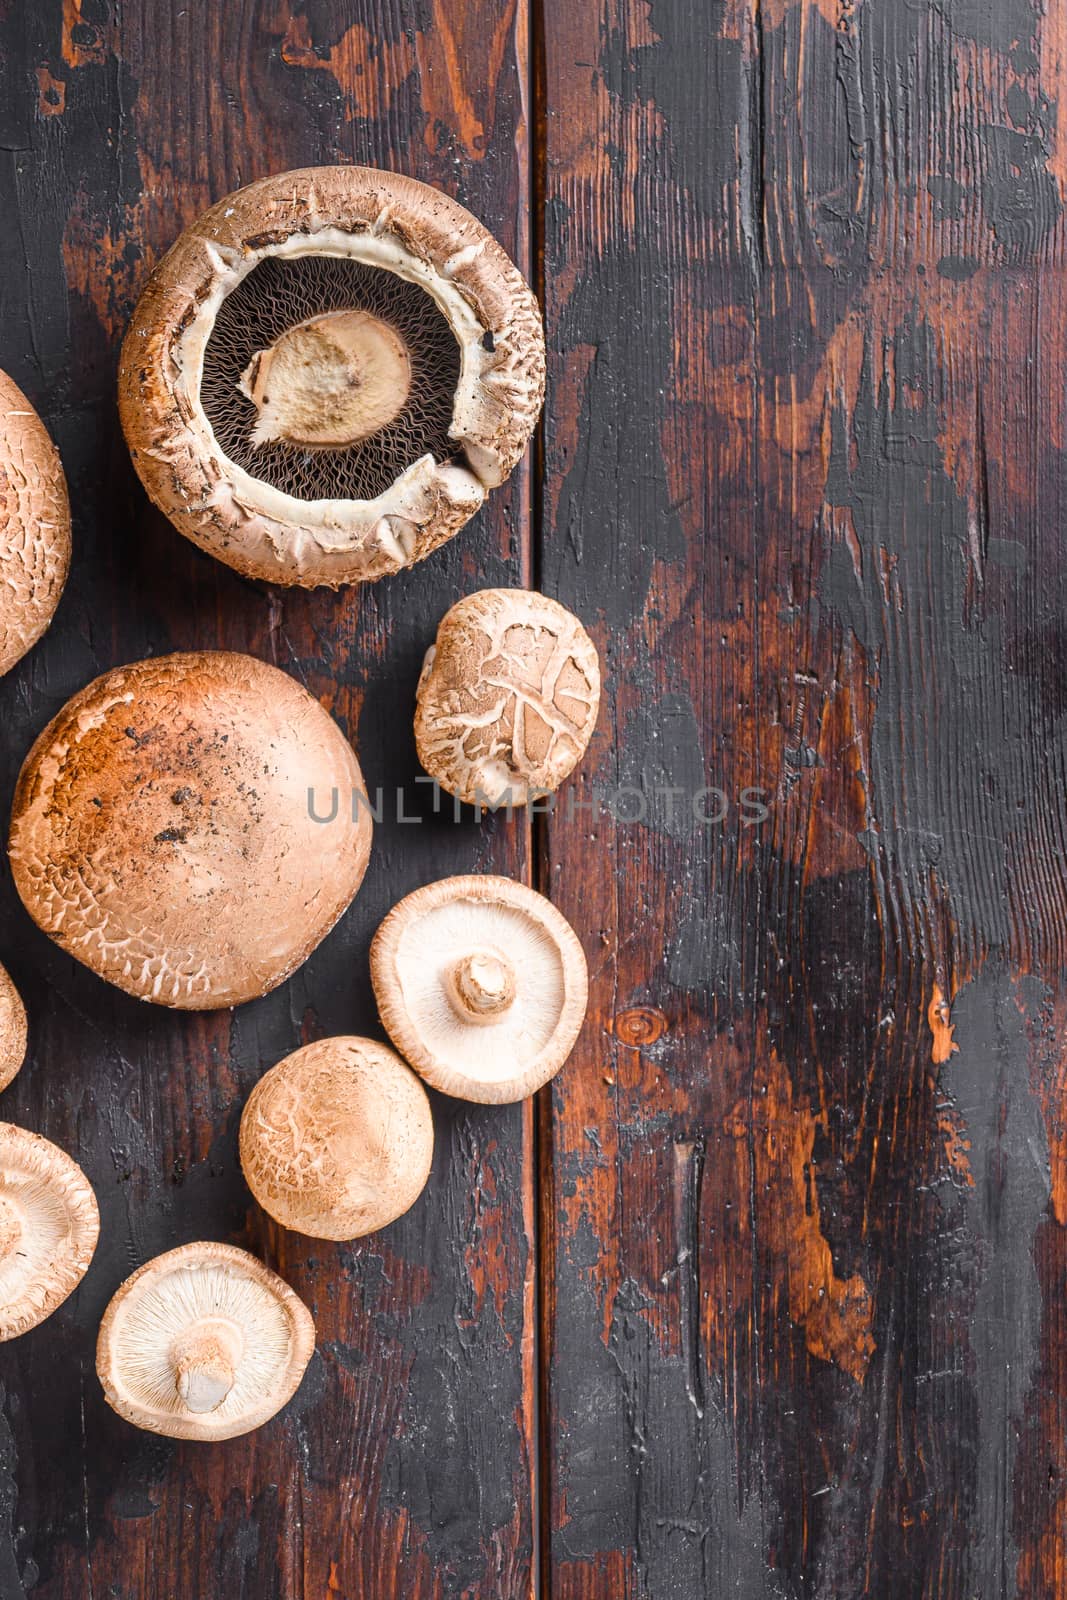 Portobello and shiitake mushrooms set on old wooden table, top view space for text. by Ilianesolenyi